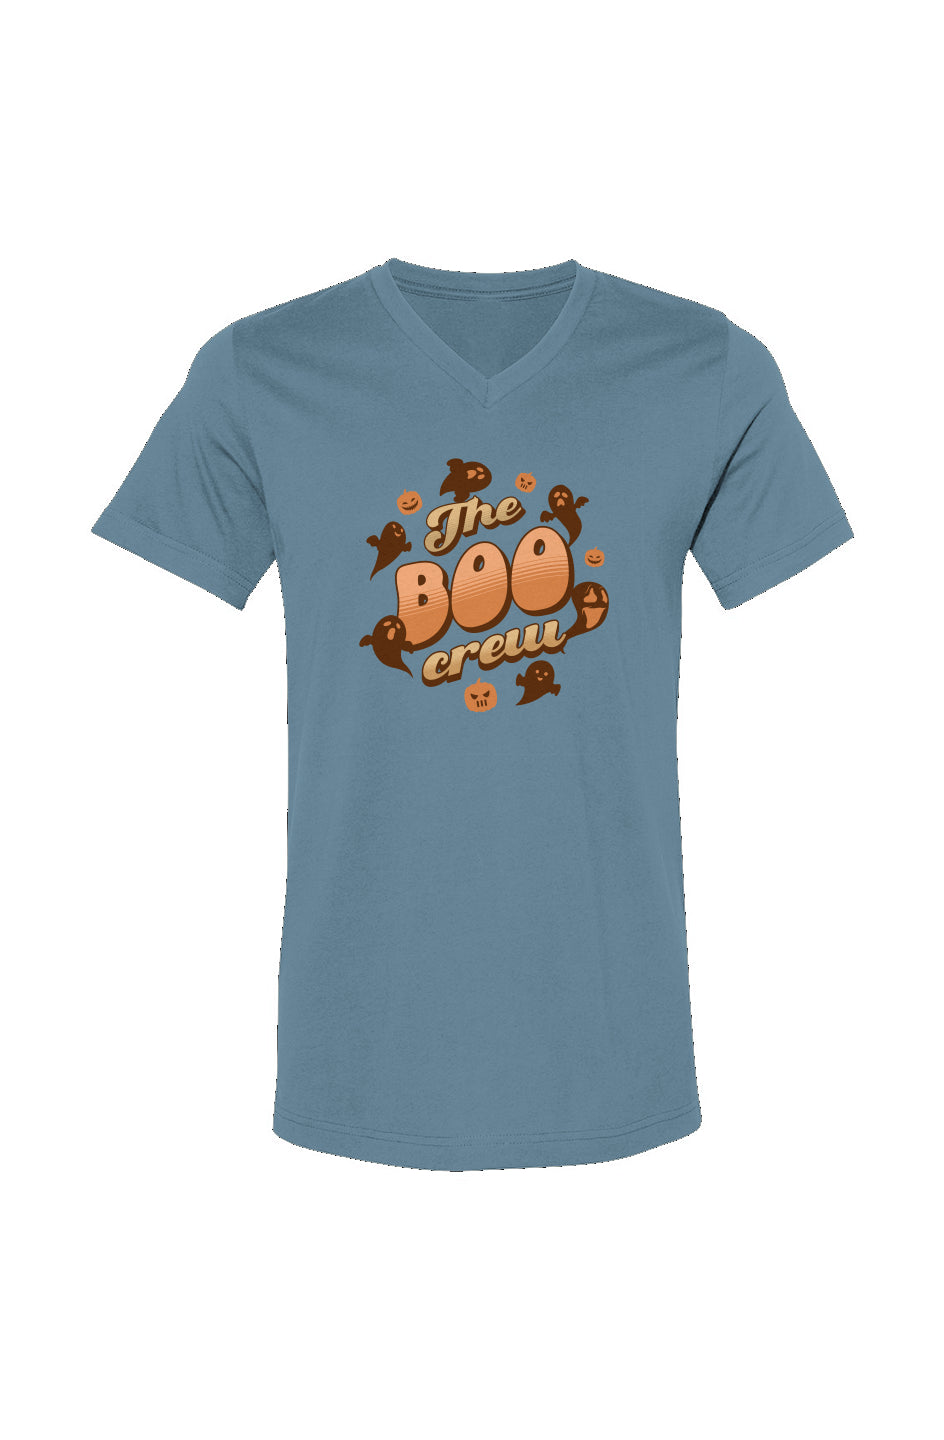 "The Boo Crew" Unisex Fit